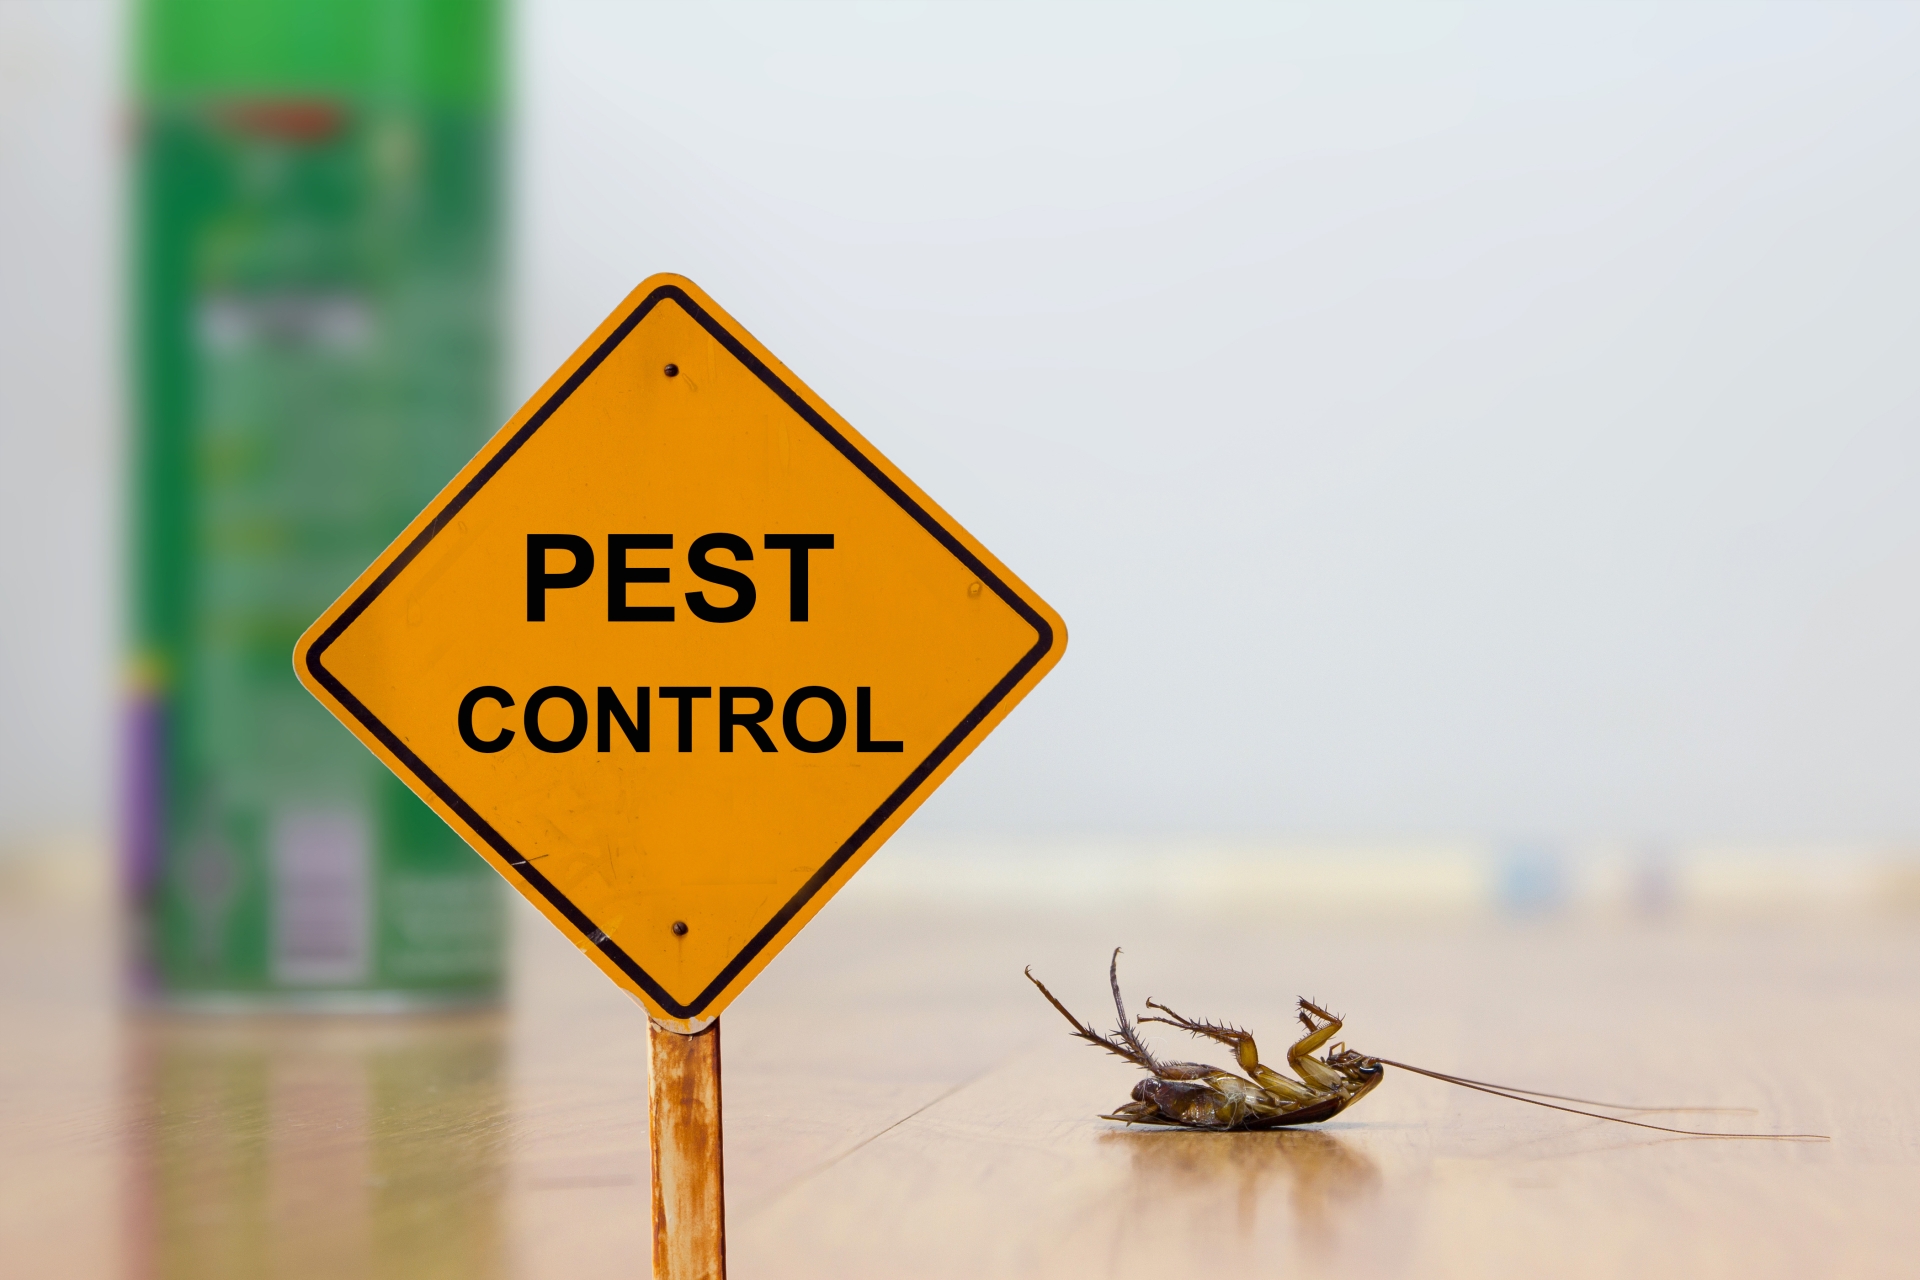 24 Hour Pest Control, Pest Control in Archway, N19. Call Now 020 8166 9746